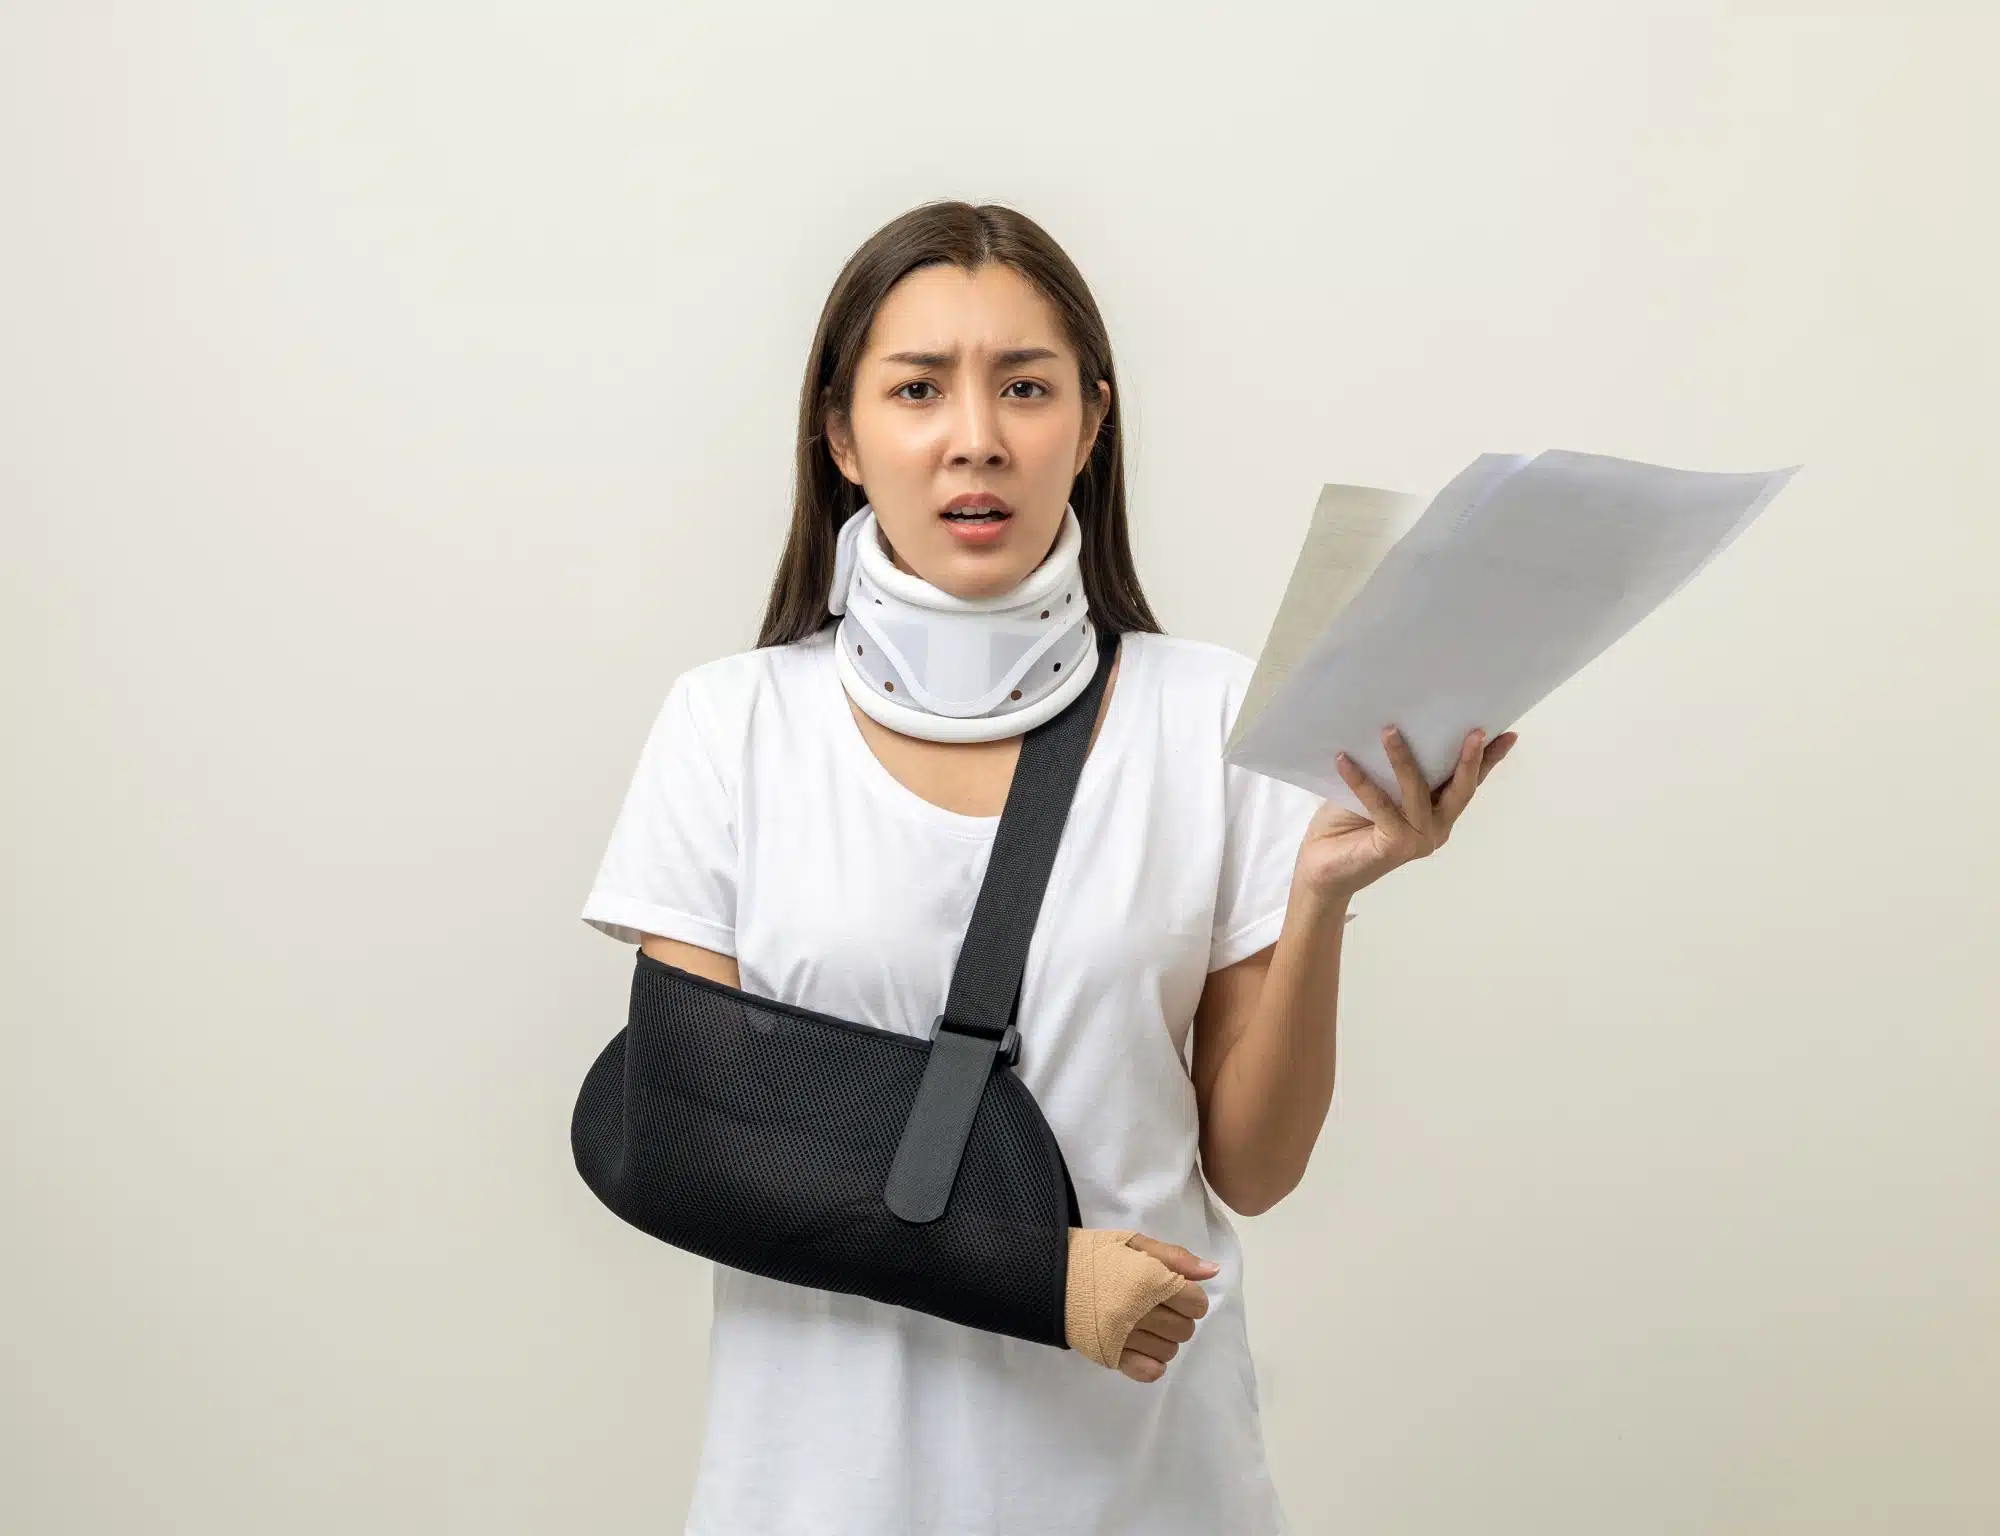 Woman in a neck brace and arm sling holding paperwork wearing a frustrated expression.